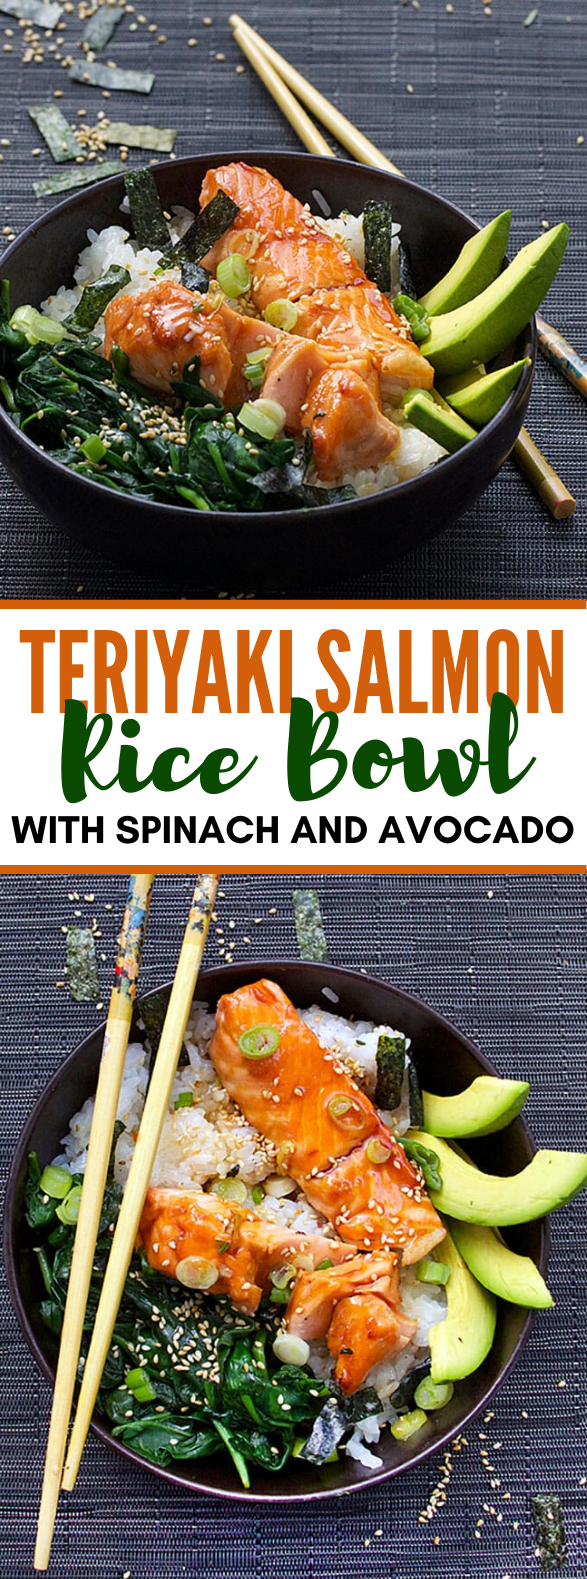 TERIYAKI SALMON RICE BOWL WITH SPINACH AND AVOCADO #dinner #lunch